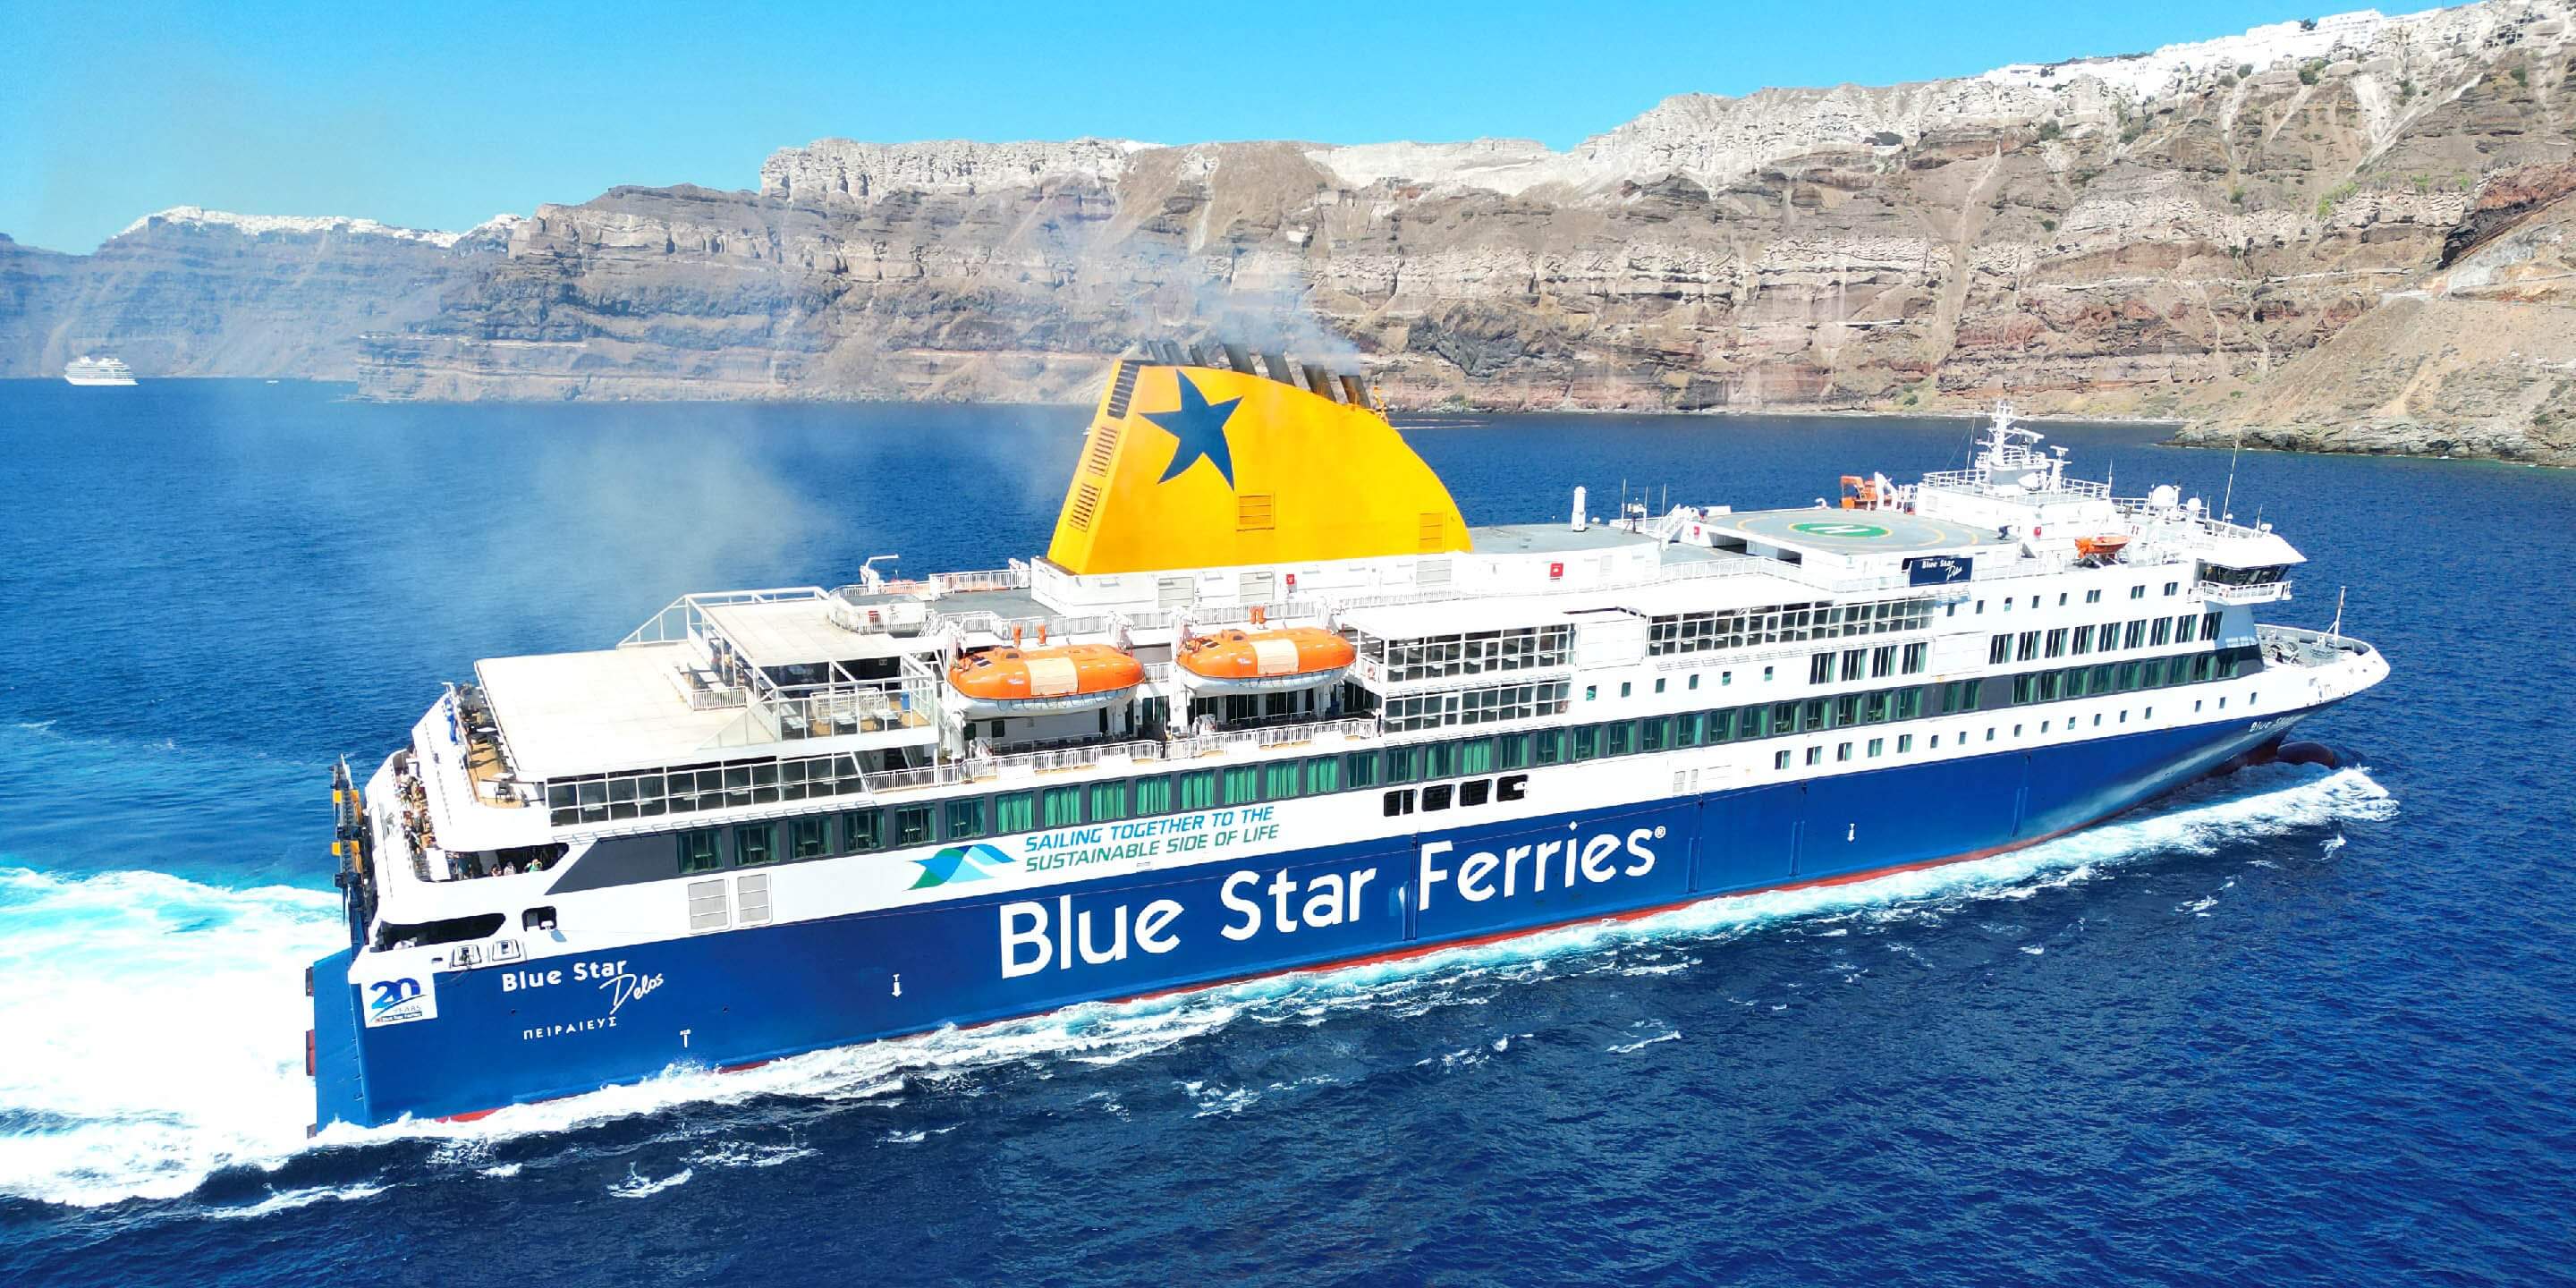 The ferry Blue Star Delos arriving in the port of Santorini